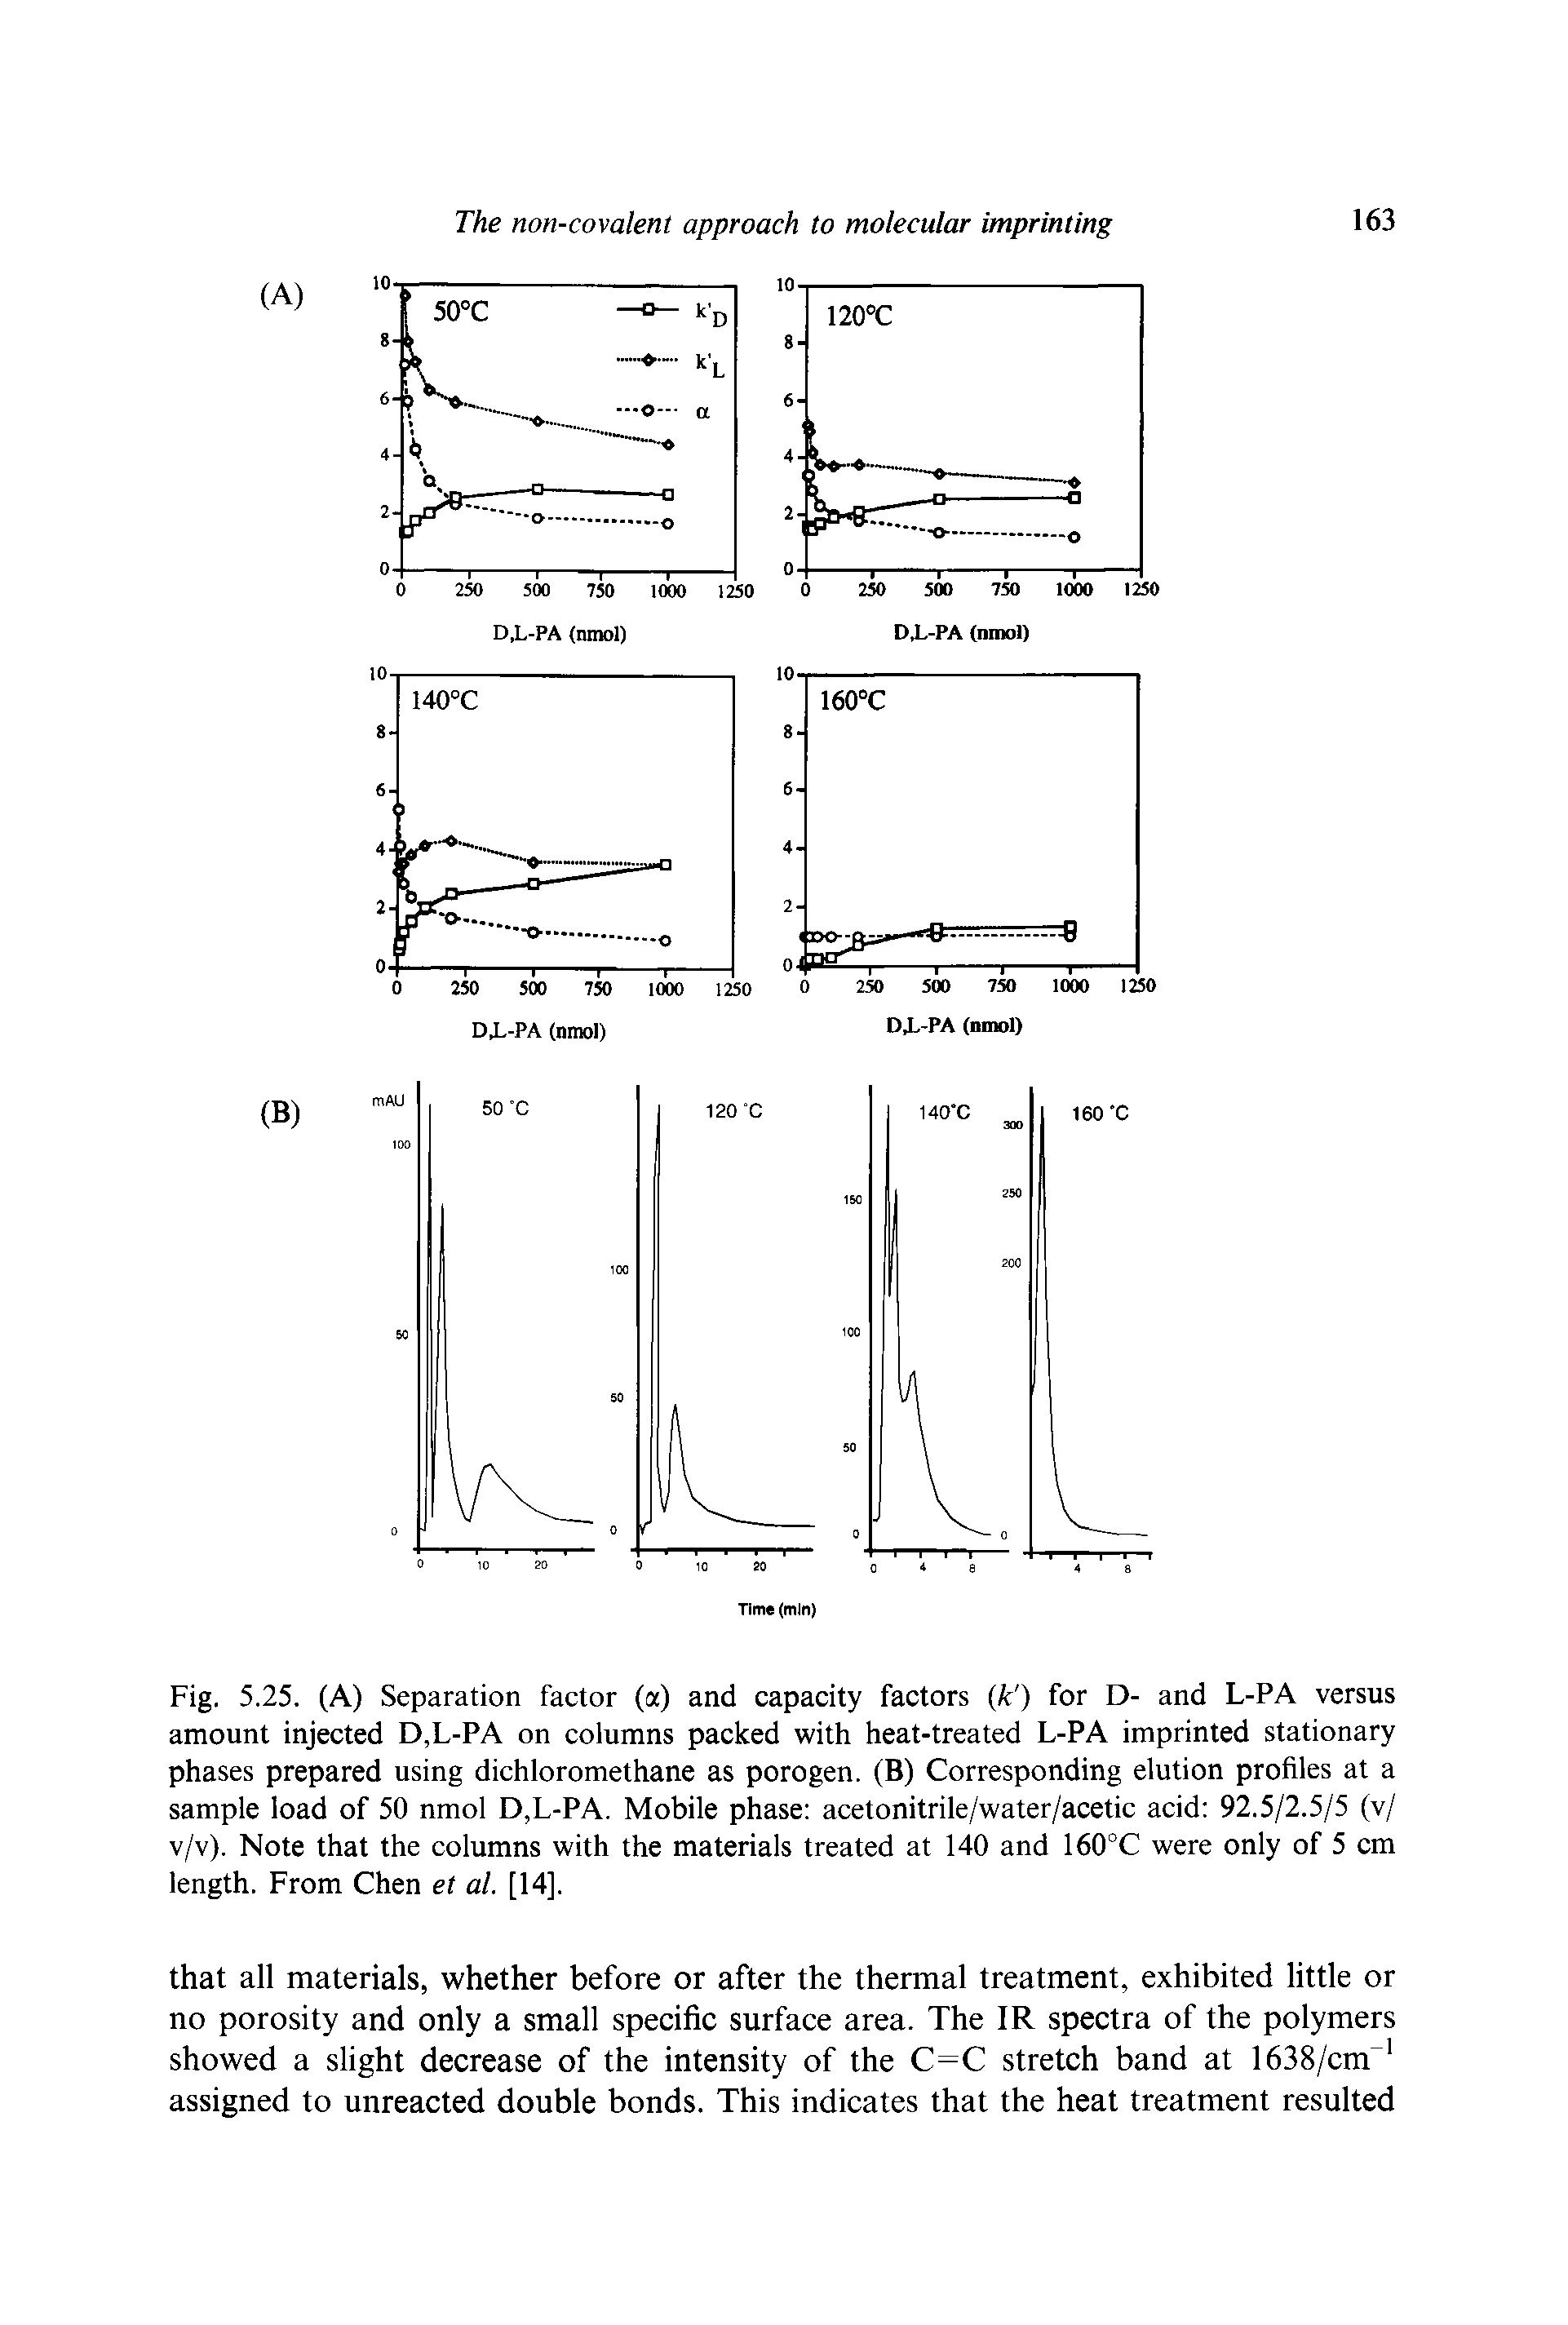 Fig. 5.25. (A) Separation factor (a) and capacity factors k ) for D- and L-PA versus amount injected D,L-PA on columns packed with heat-treated L-PA imprinted stationary phases prepared using dichloromethane as porogen. (B) Corresponding elution profiles at a sample load of 50 nmol D,L-PA. Mobile phase acetonitrile/water/acetic acid 92.5/2.5/5 (v/ v/v). Note that the columns with the materials treated at 140 and 160°C were only of 5 cm length. From Chen et al. [14].